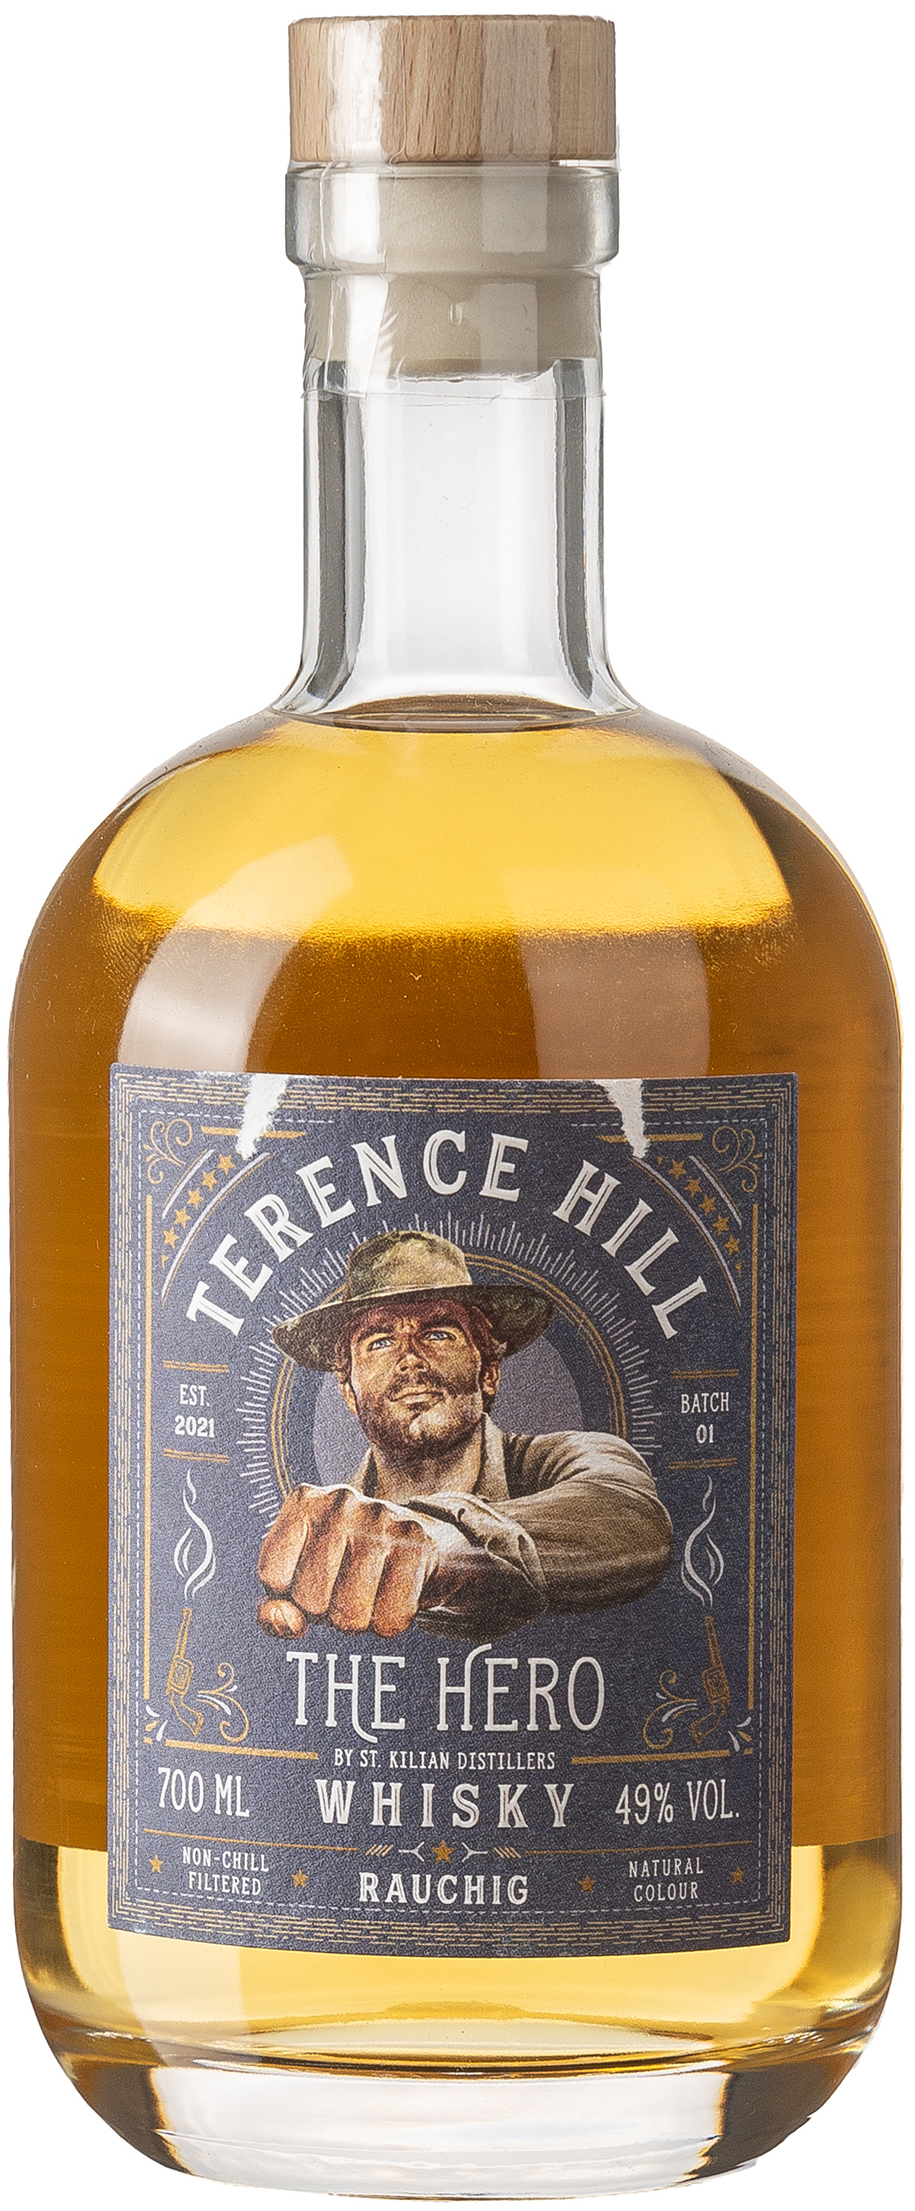 Terence Hill The Hero Whisky Rauchig 49% vol. 0,7L 